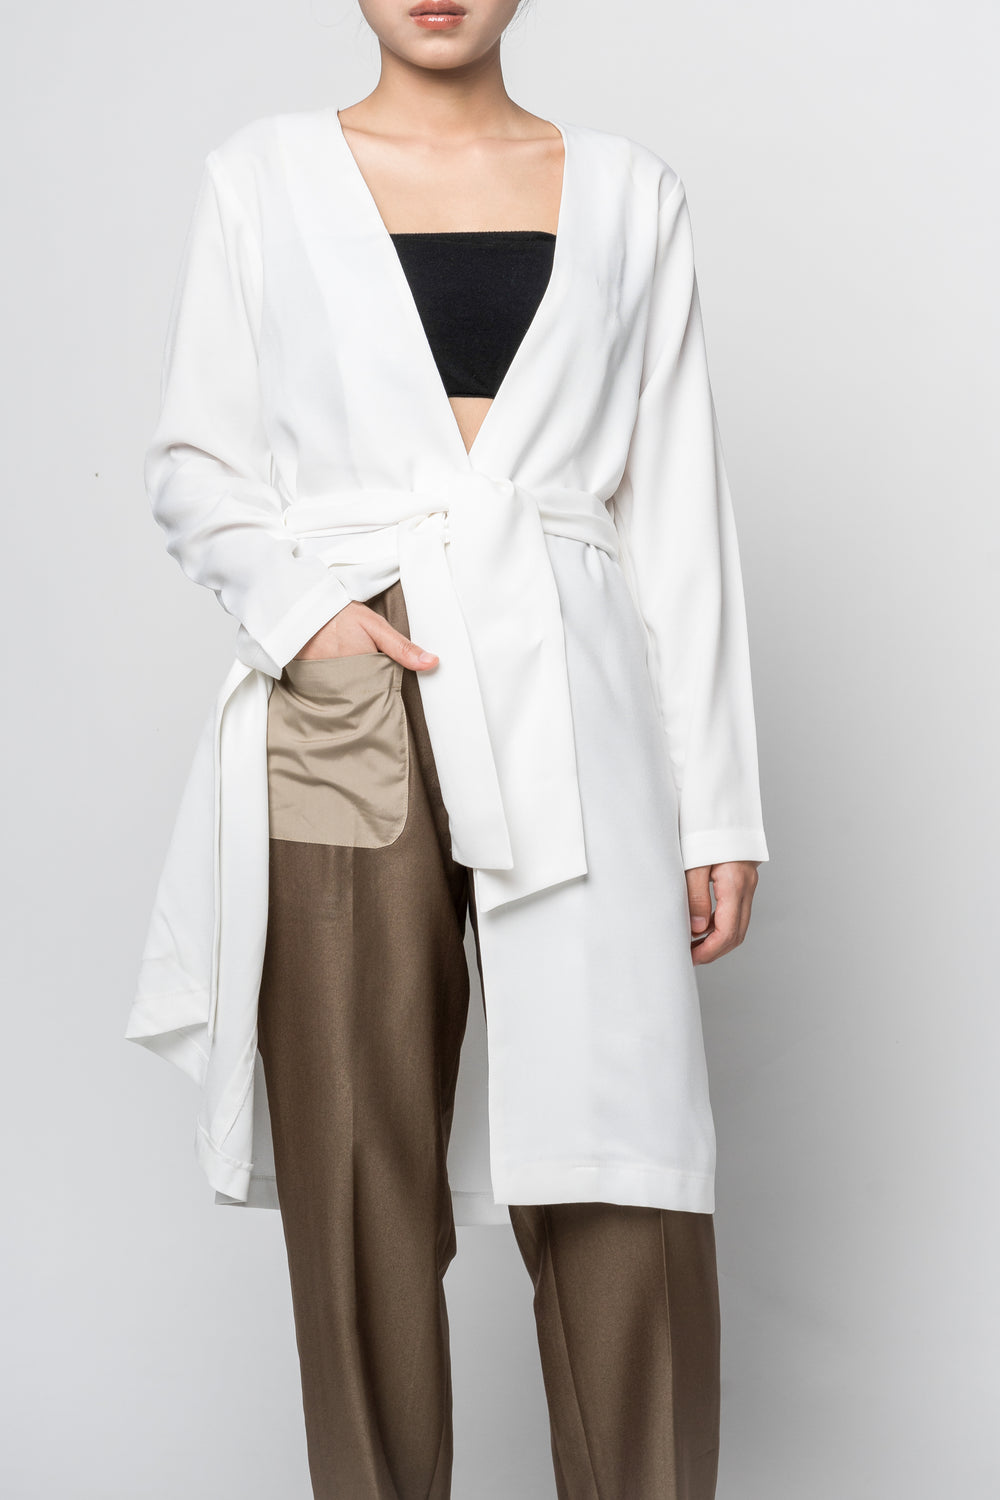 módni Peony White Tunic Kimono With Sash Modest Women's Long-Sleeved Outerwear With Hidden Front Metal Hook